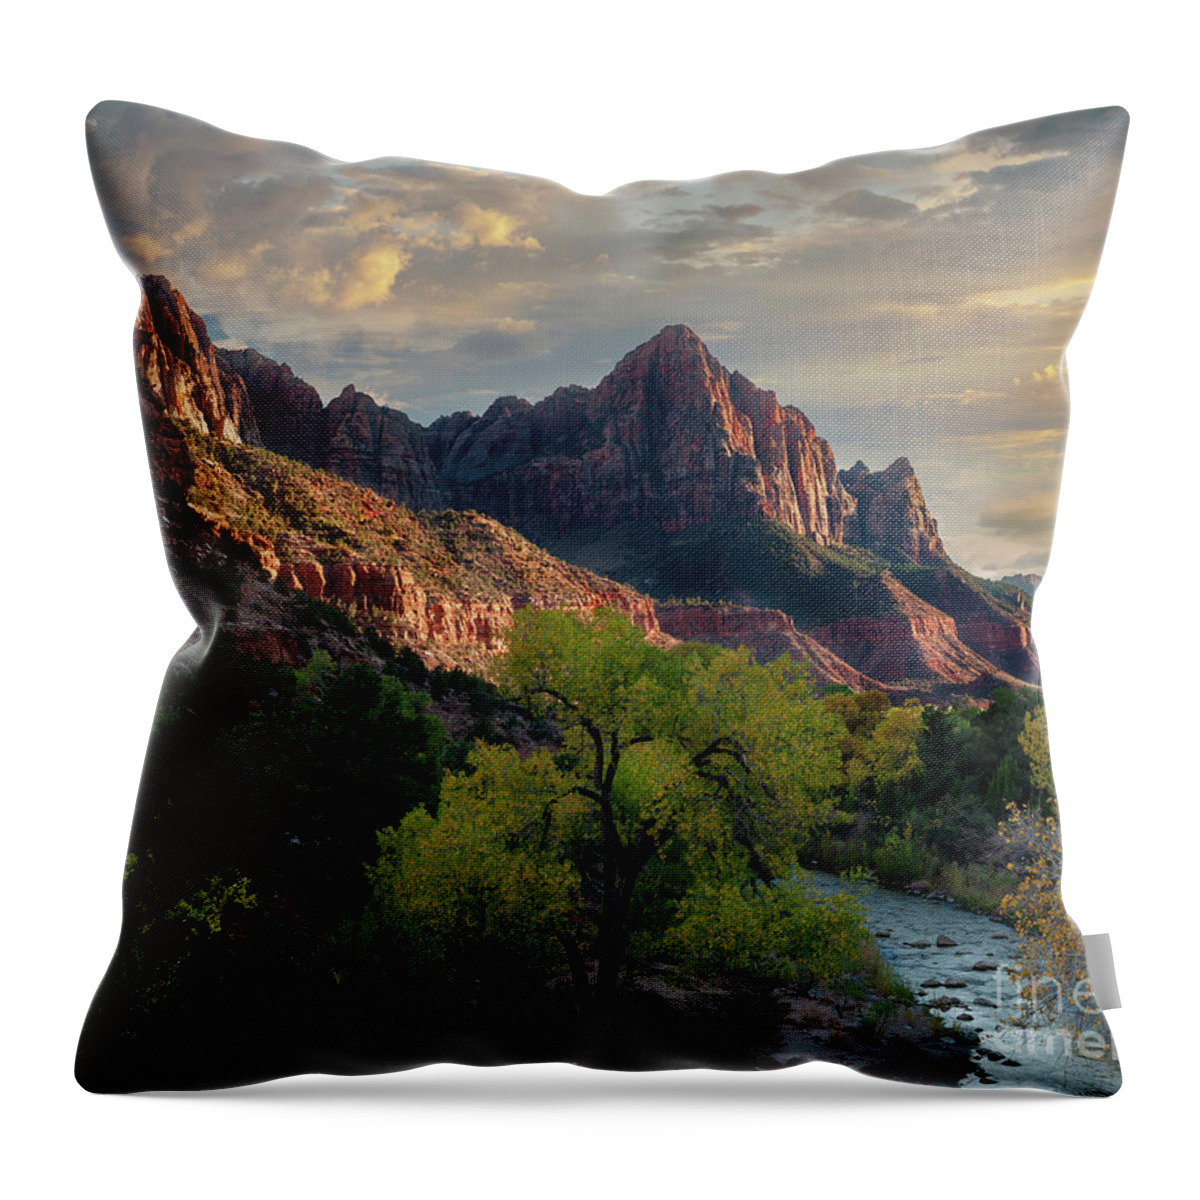 Zion National Park Throw Pillow featuring the photograph The Watchman and Virgin River by Sandra Bronstein